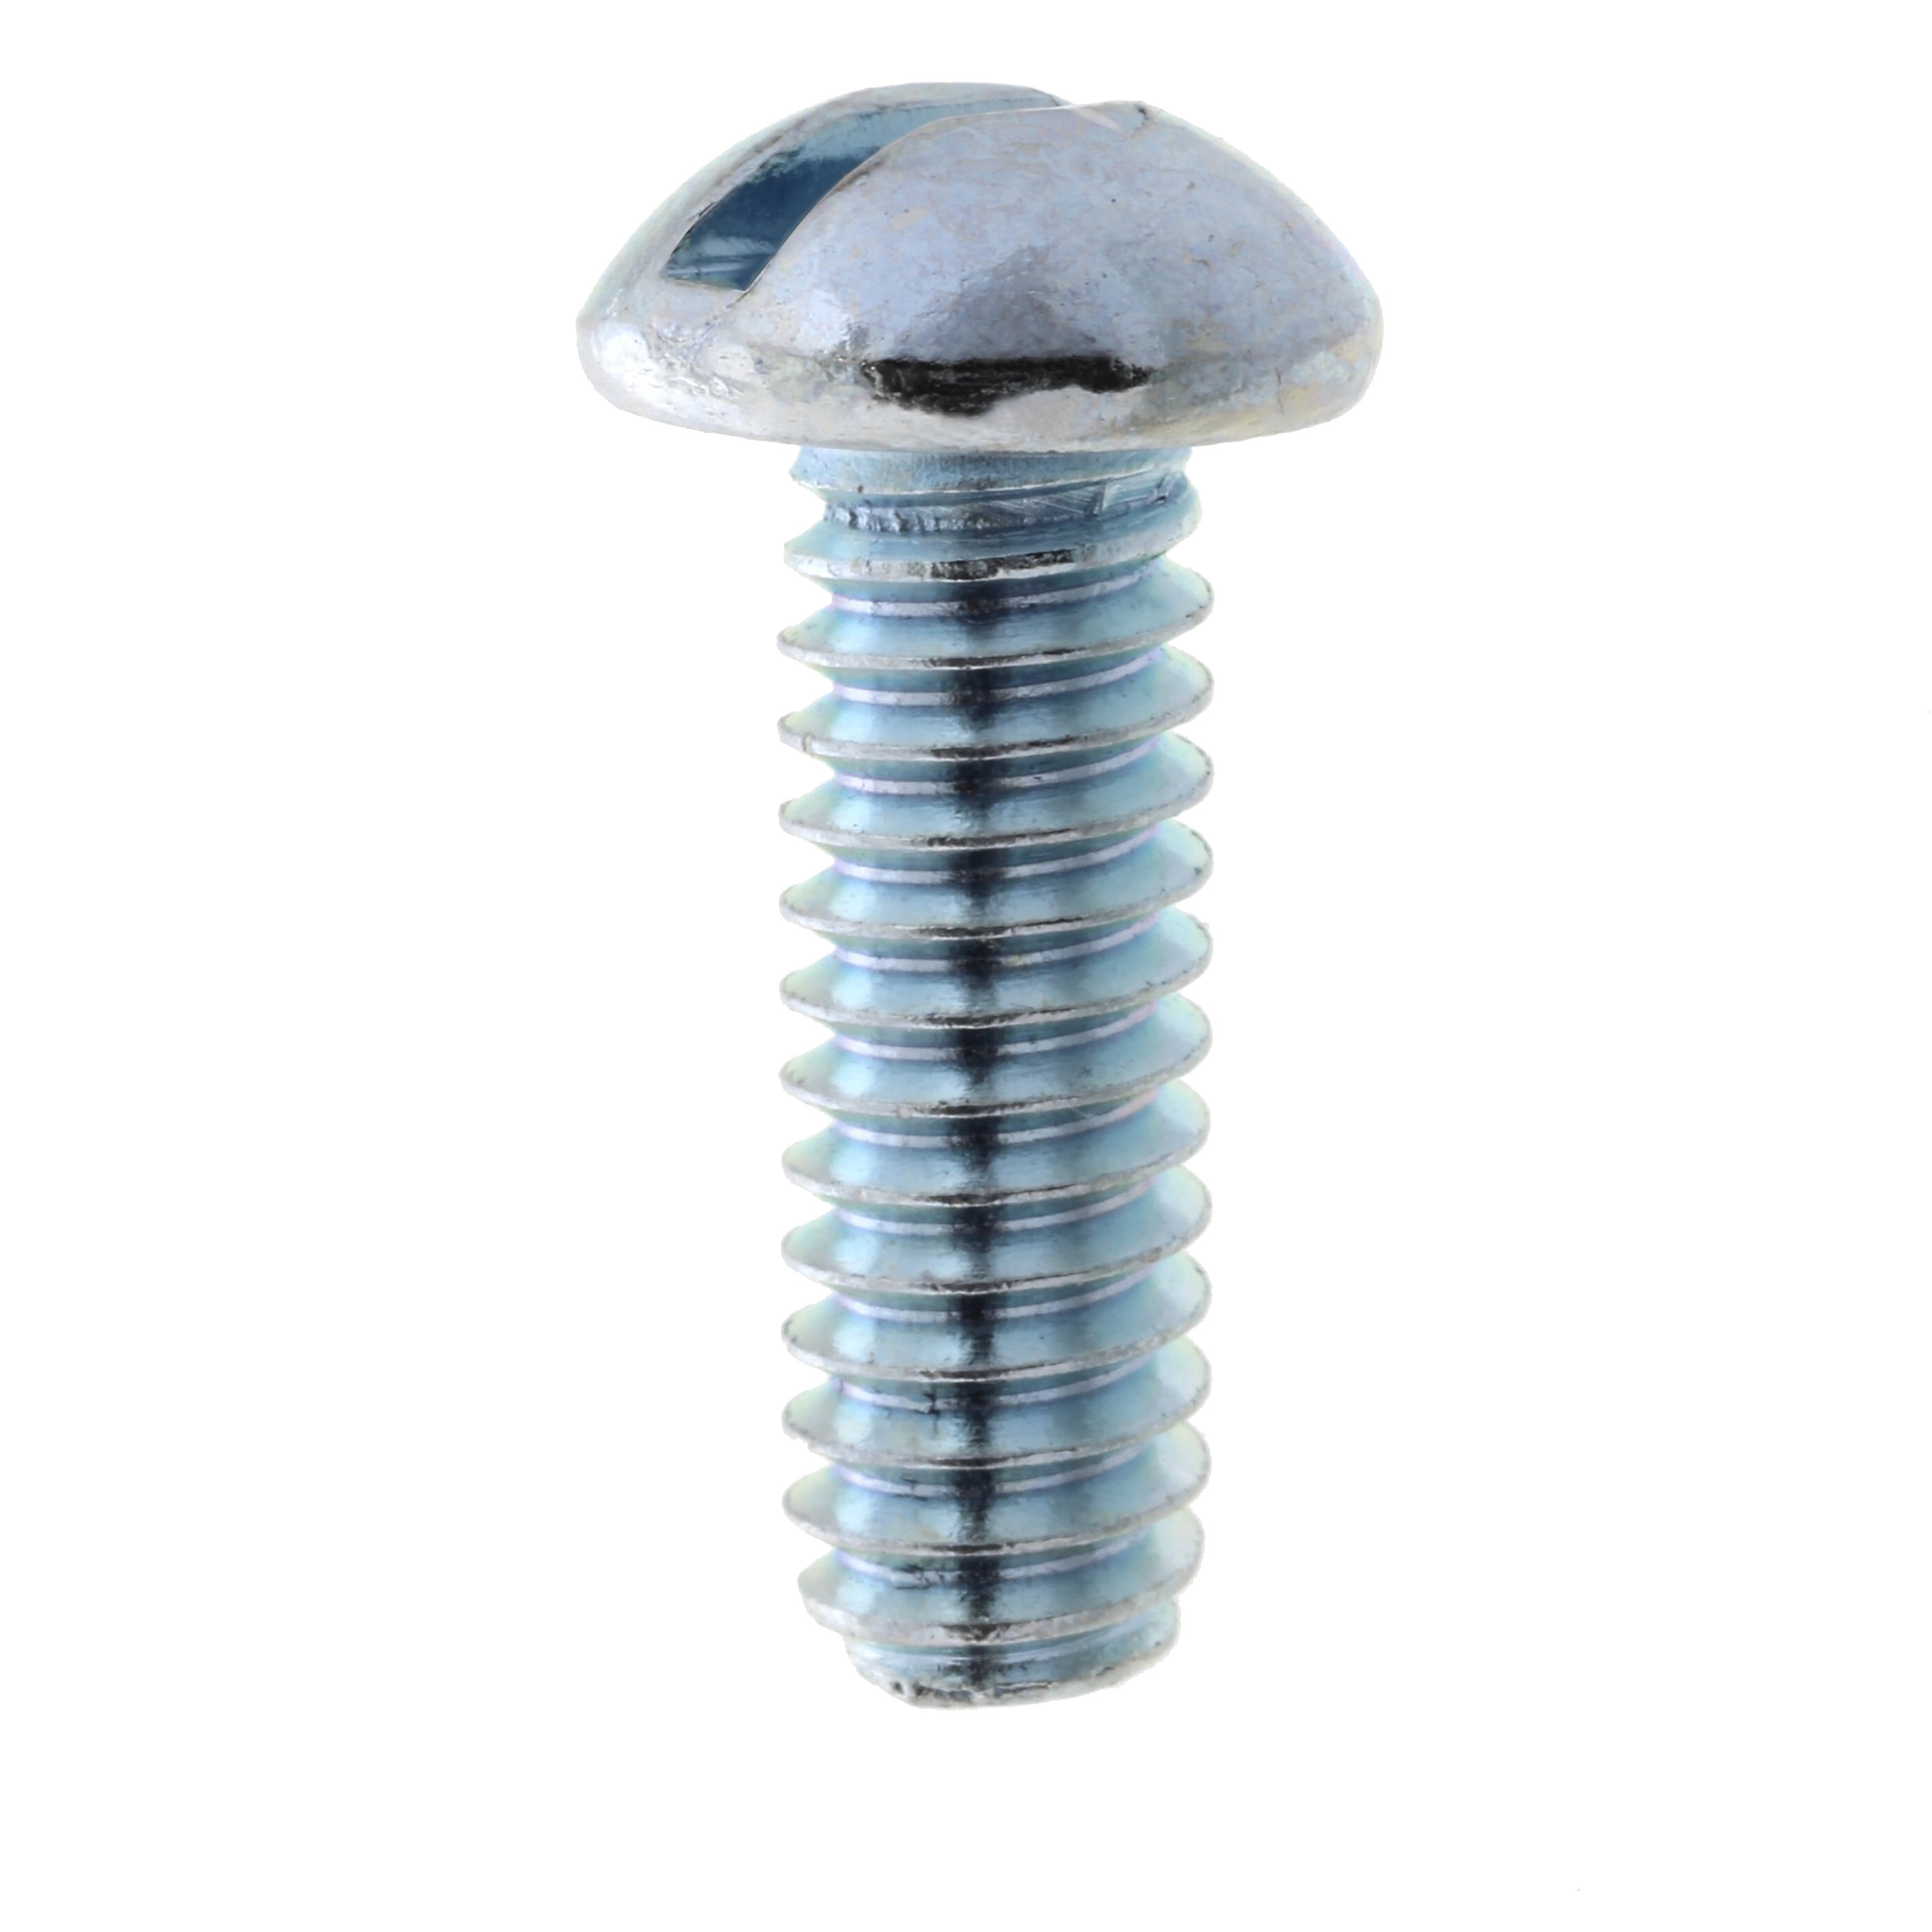 pan head slot bolt bolts screw pack of 20 Machine screws with nuts M3 x 20 